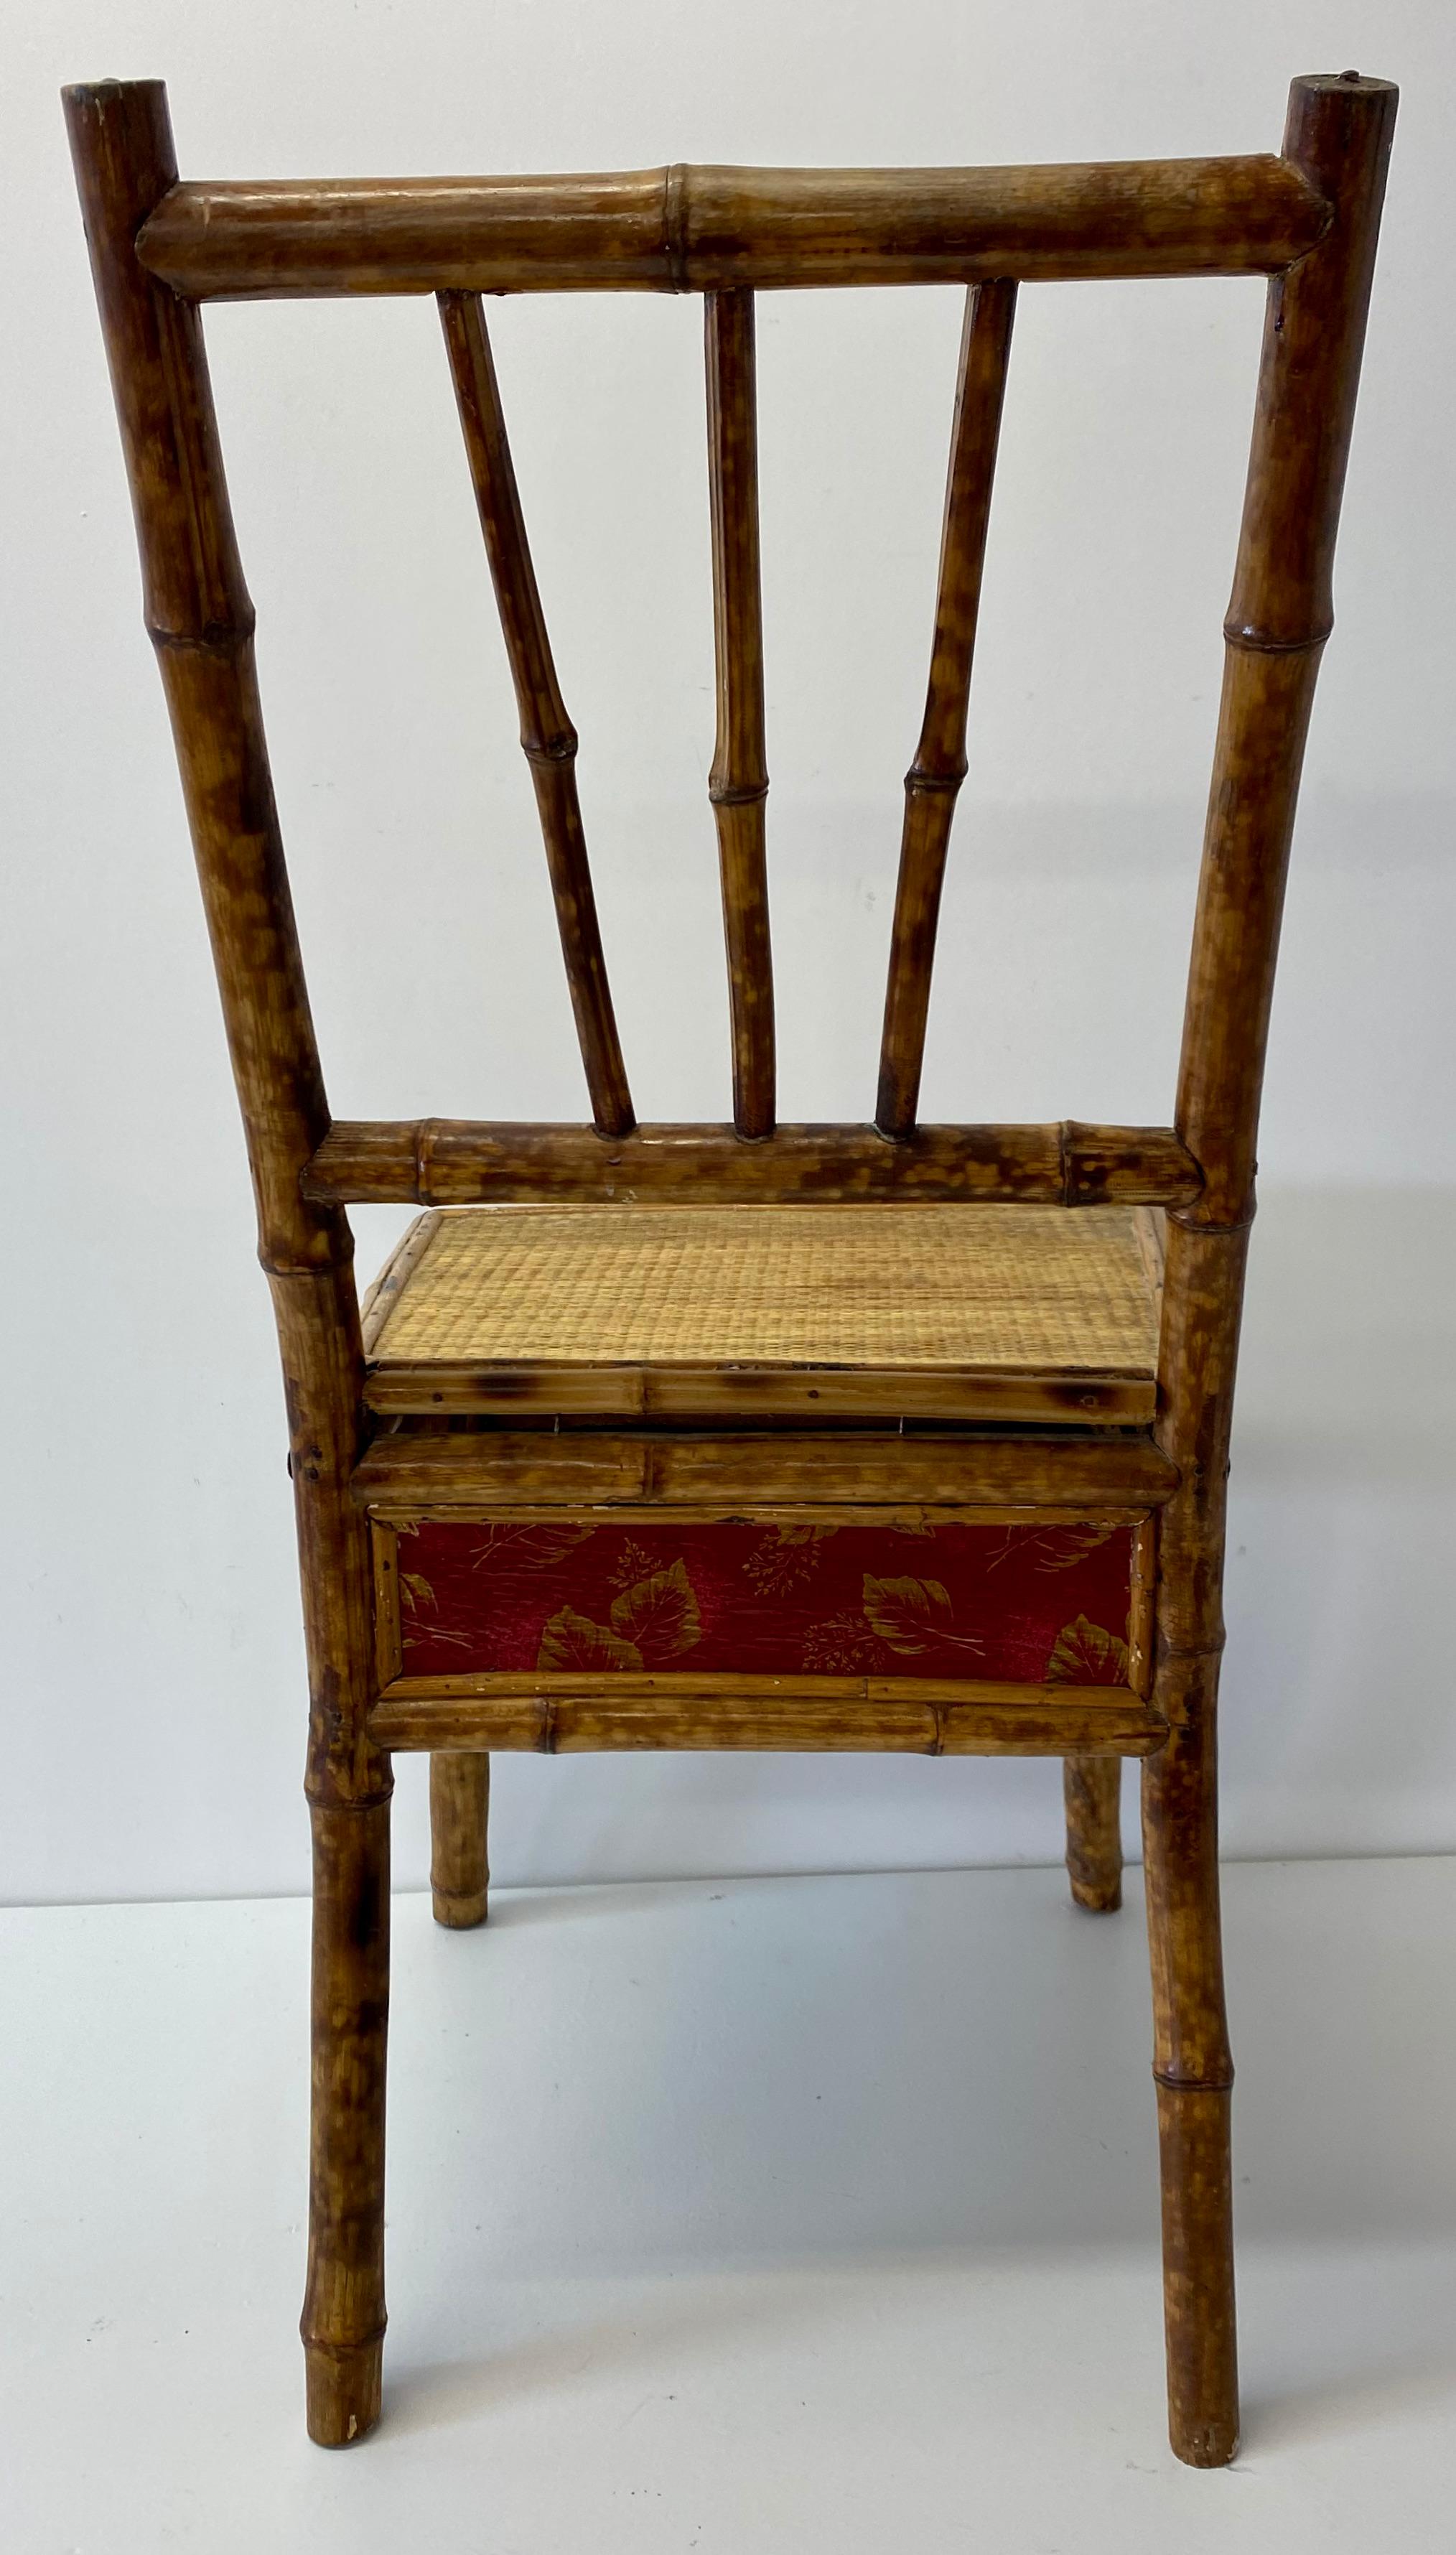 Hand-Crafted Late 19th Century Bamboo & Cane Victorian Bedroom Chair, C.1890 For Sale